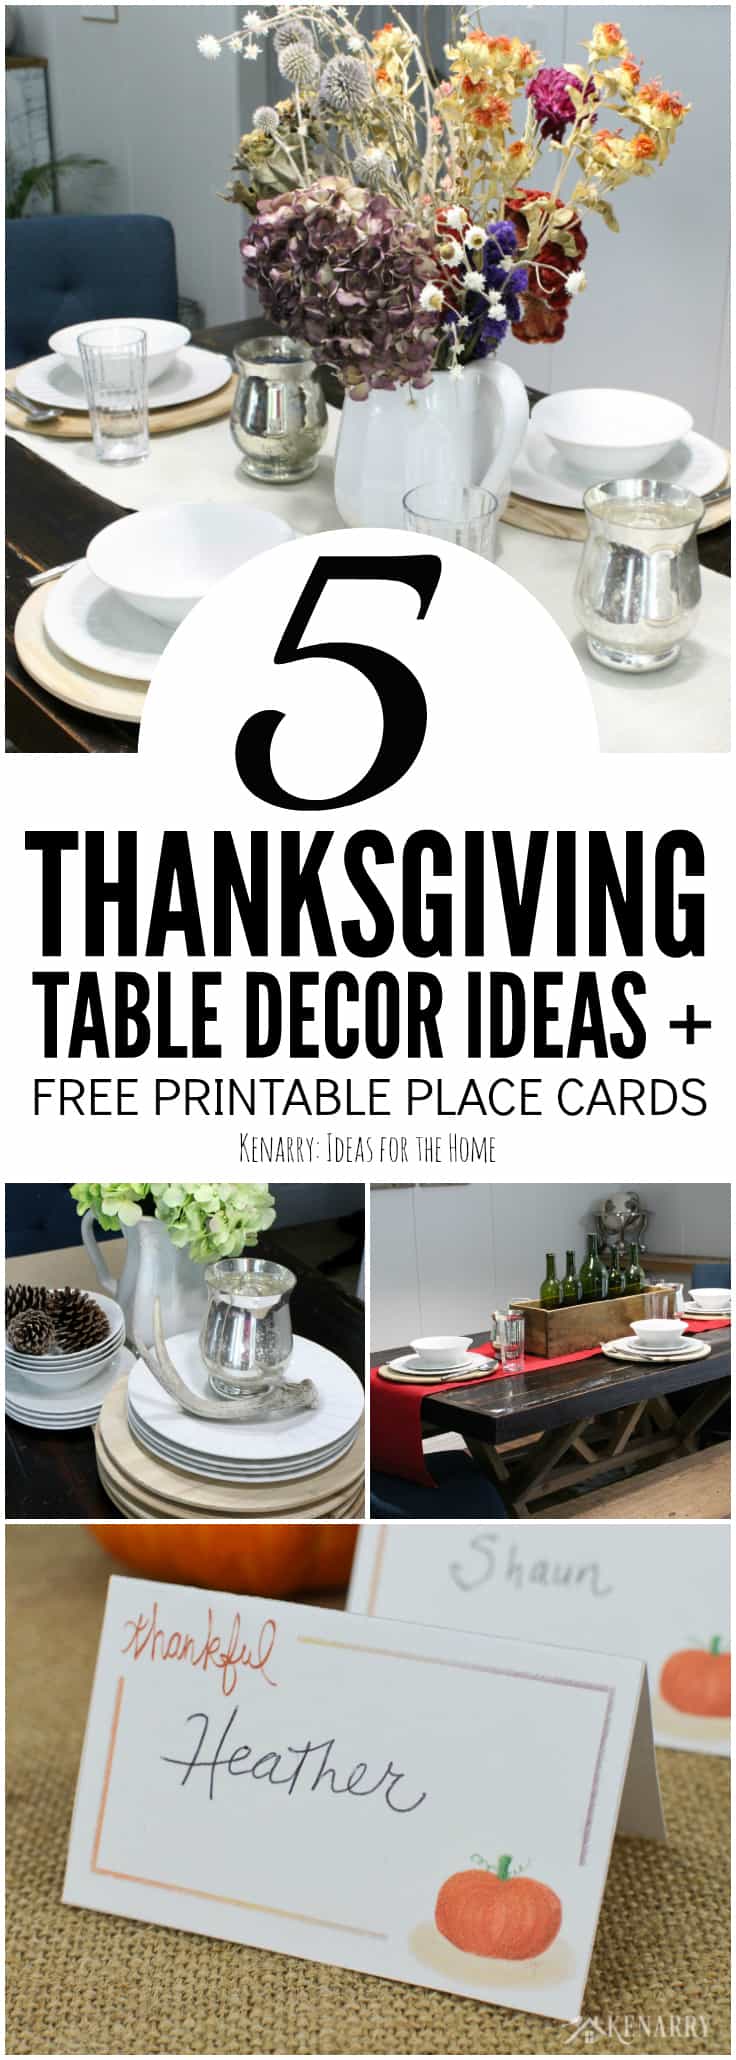 Thanksgiving table decor can be super easy with rustic farmhouse style touches like a burlap table runner. Use these 5 simple yet stylish ideas and tips along with free printable place cards to create a holiday dinner your family will enjoy.